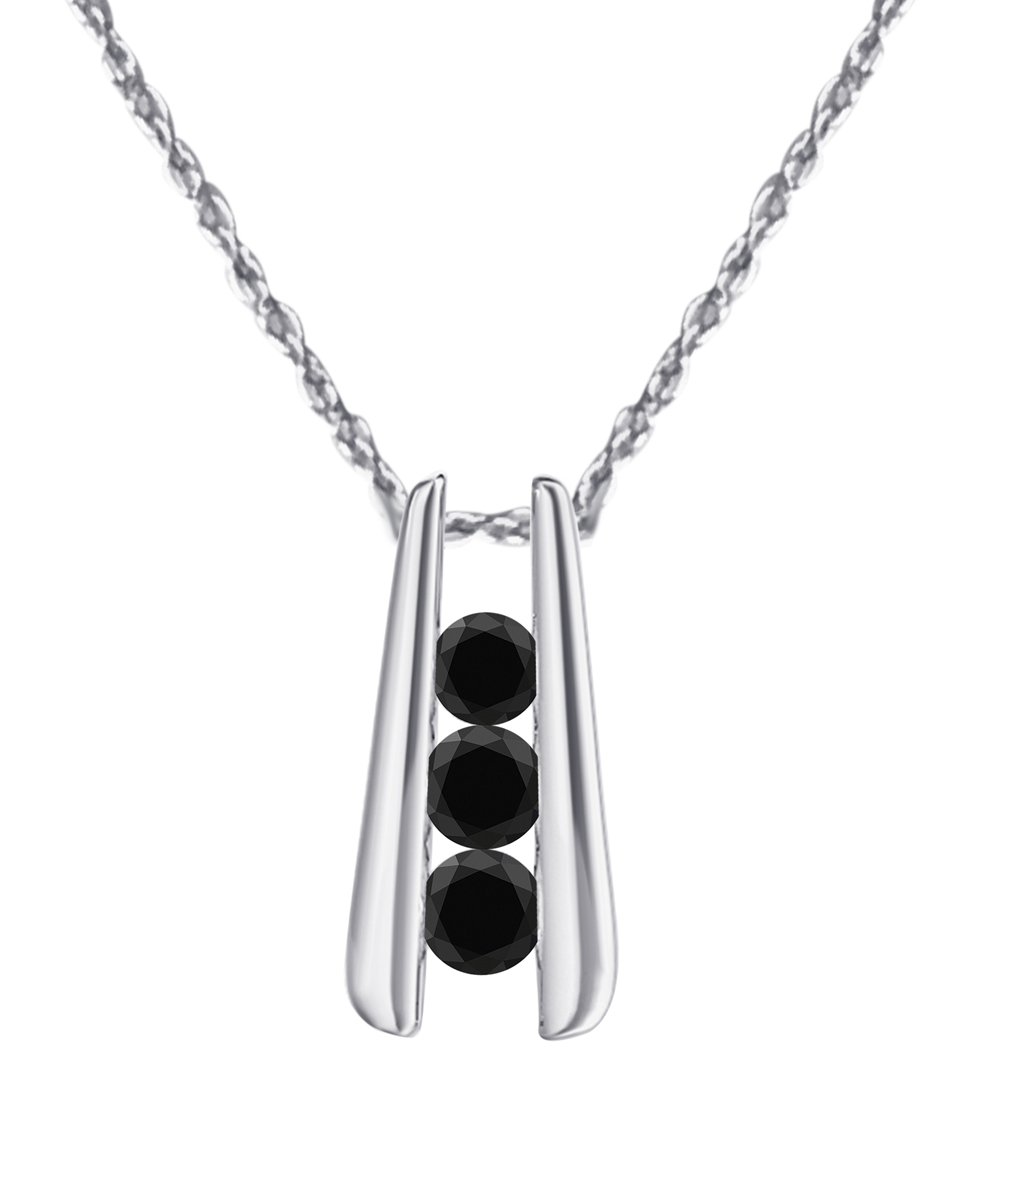 Aone 1Ct Three Stone Black Diamond Channel Set Pendant With 18" Chain In 14K White Gold